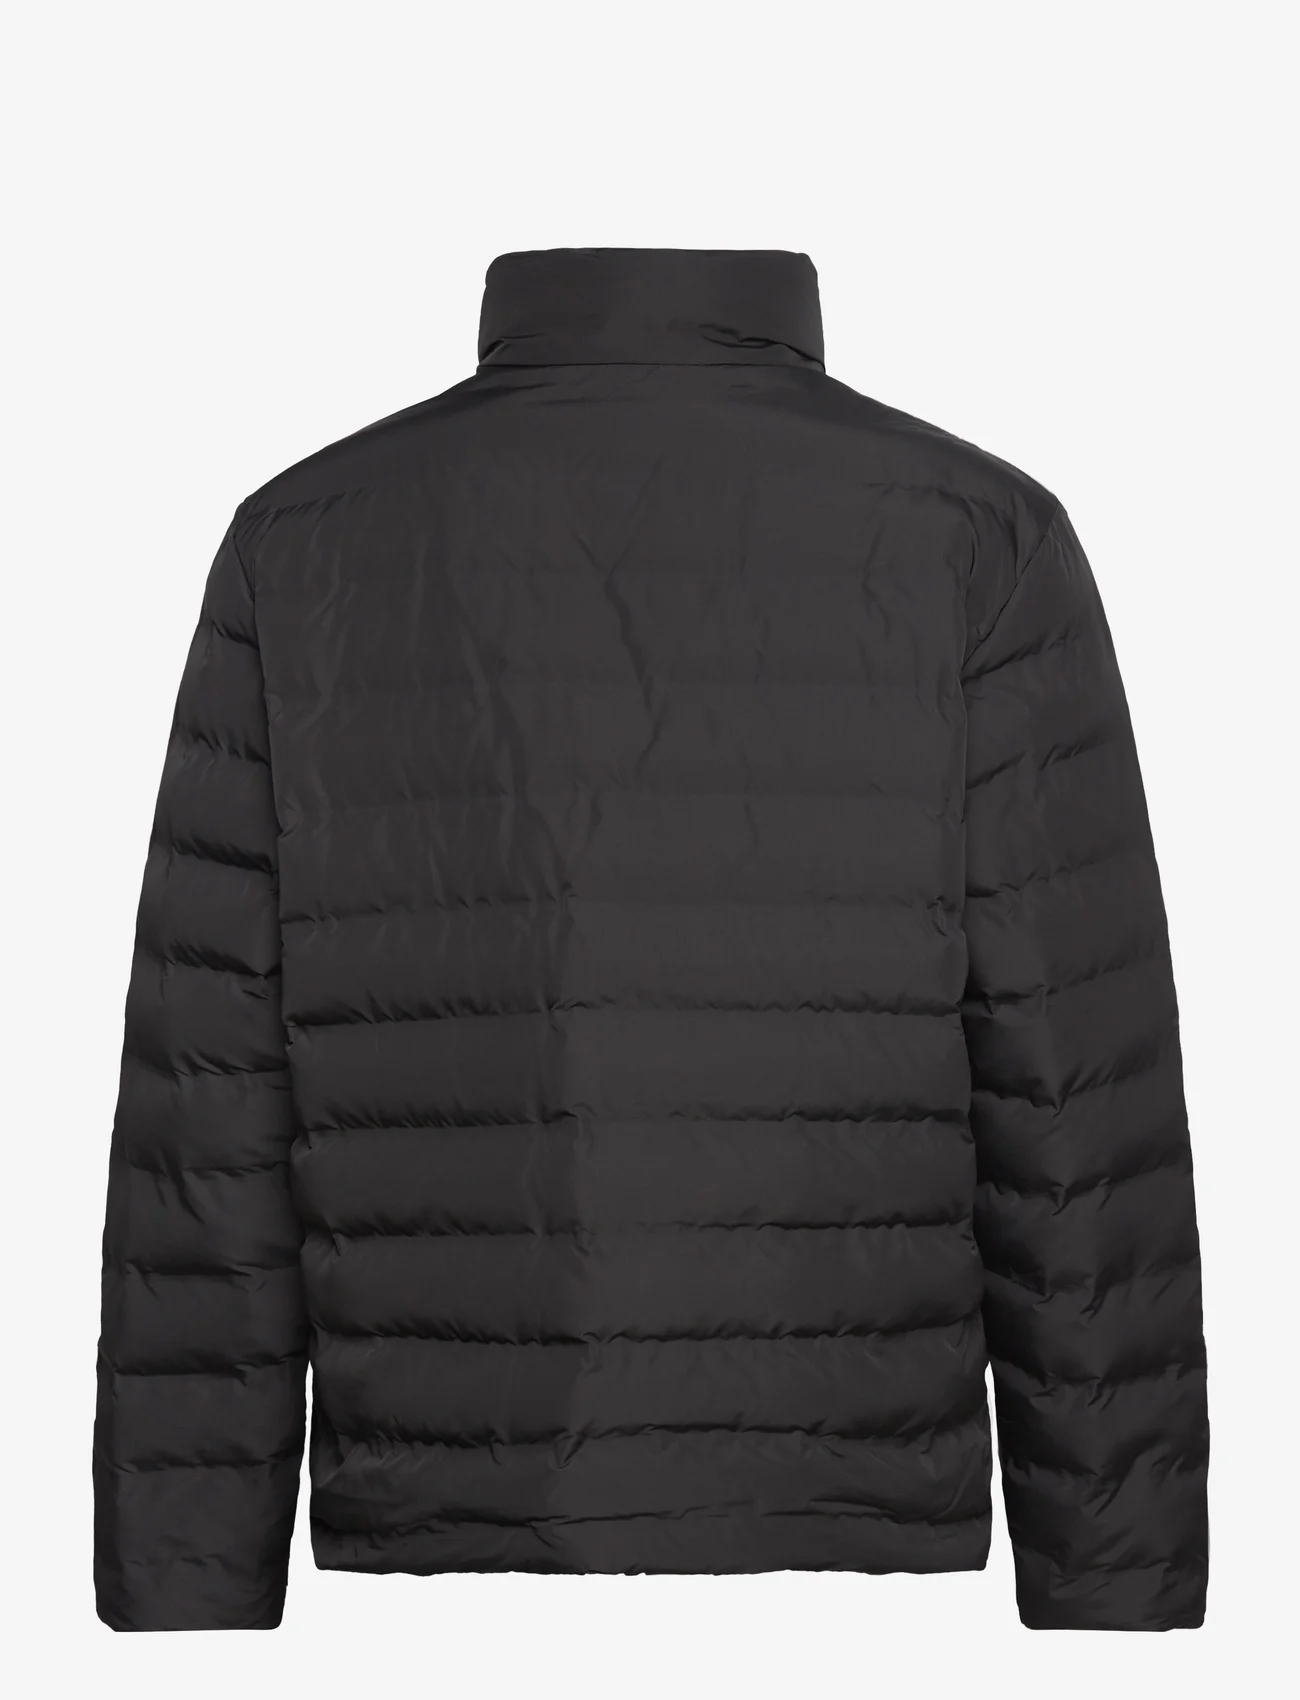 Selected Homme - SLHBARRY QUILTED JACKET NOOS - talvitakit - stretch limo - 1